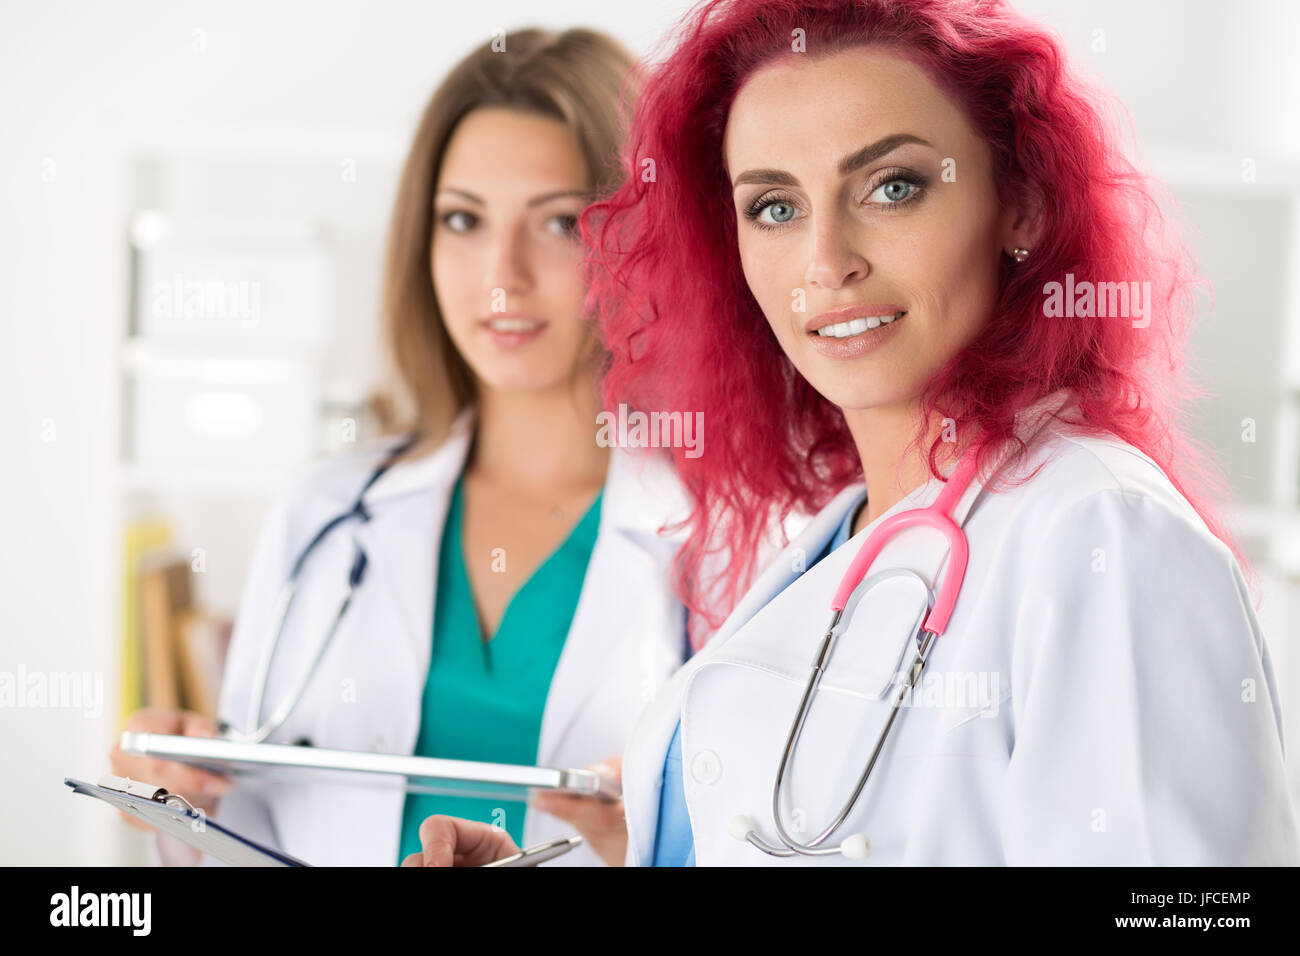 Portrait of two female doctors standing with clipboard and tablet ready to work. Health care, medical service or education and teamwork concept. Stock Photo